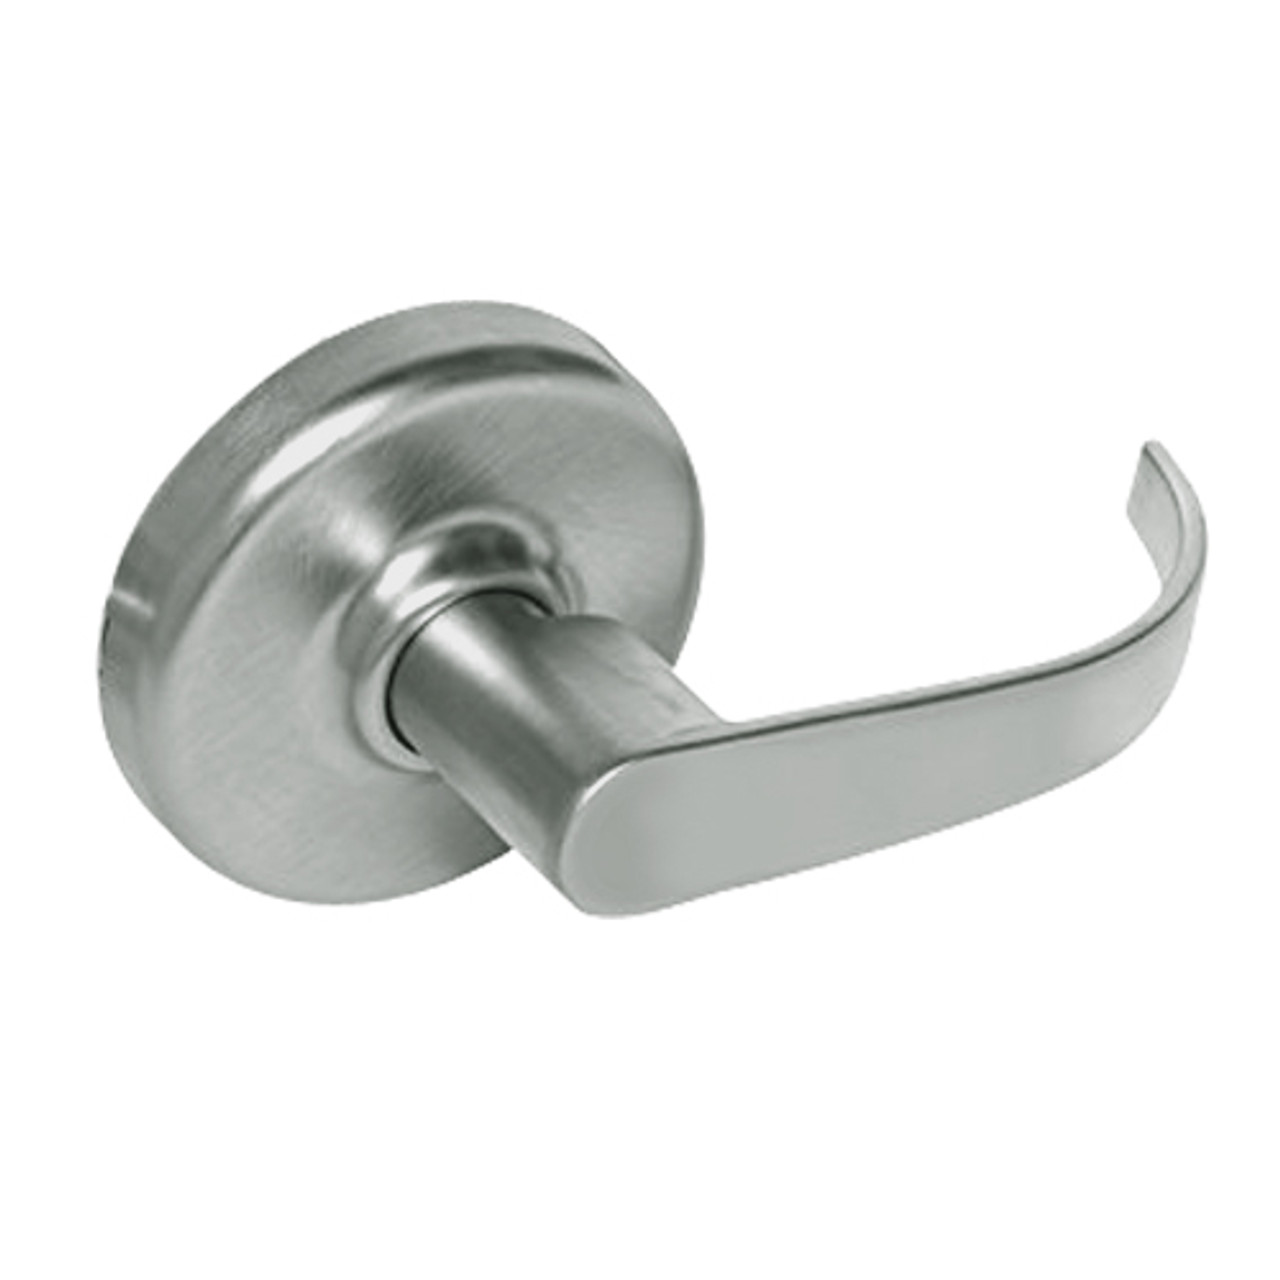 CL3390-PZD-619 Corbin CL3300 Series Extra Heavy Duty Passage with Turnpiece Cylindrical Locksets with Princeton Lever in Satin Nickel Plated Finish